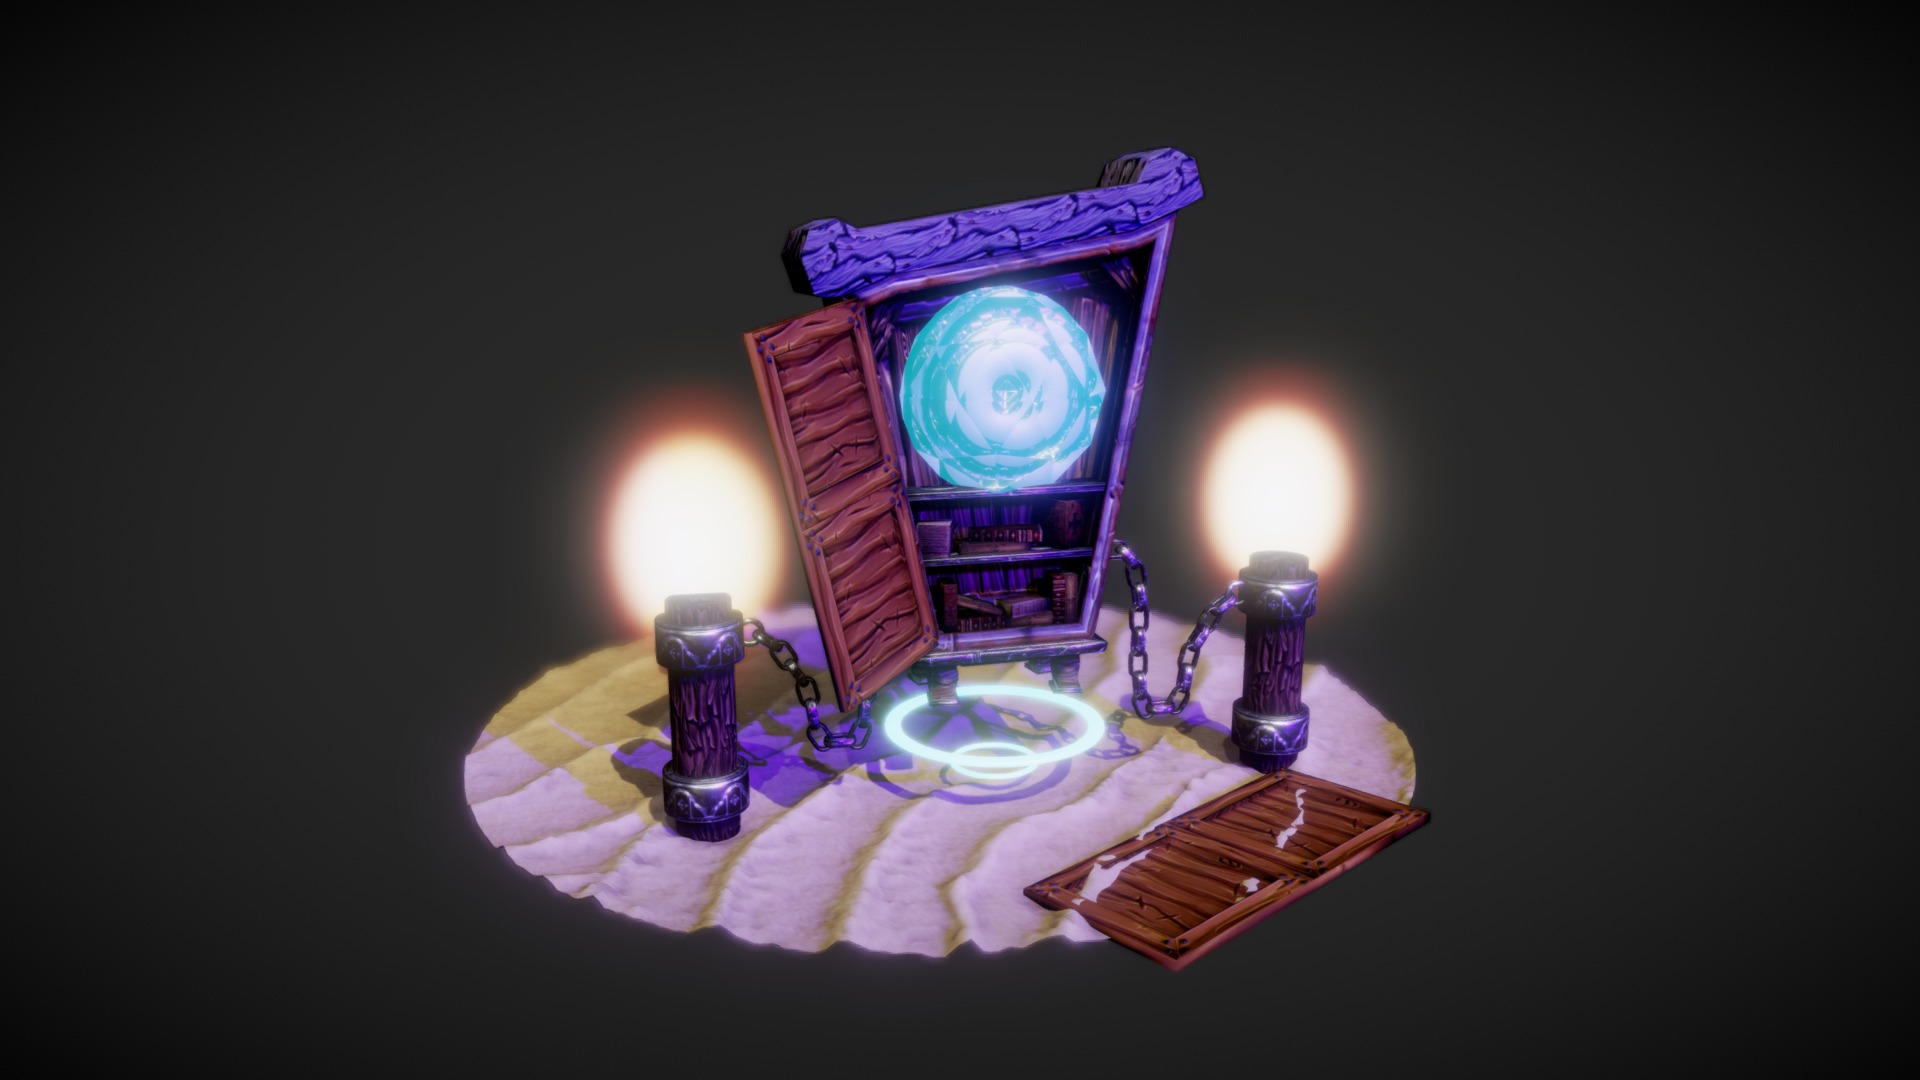 3D model Floating Wardrobe - This is a 3D model of the Floating Wardrobe. The 3D model is about a purple and purple lantern with a candle in it.